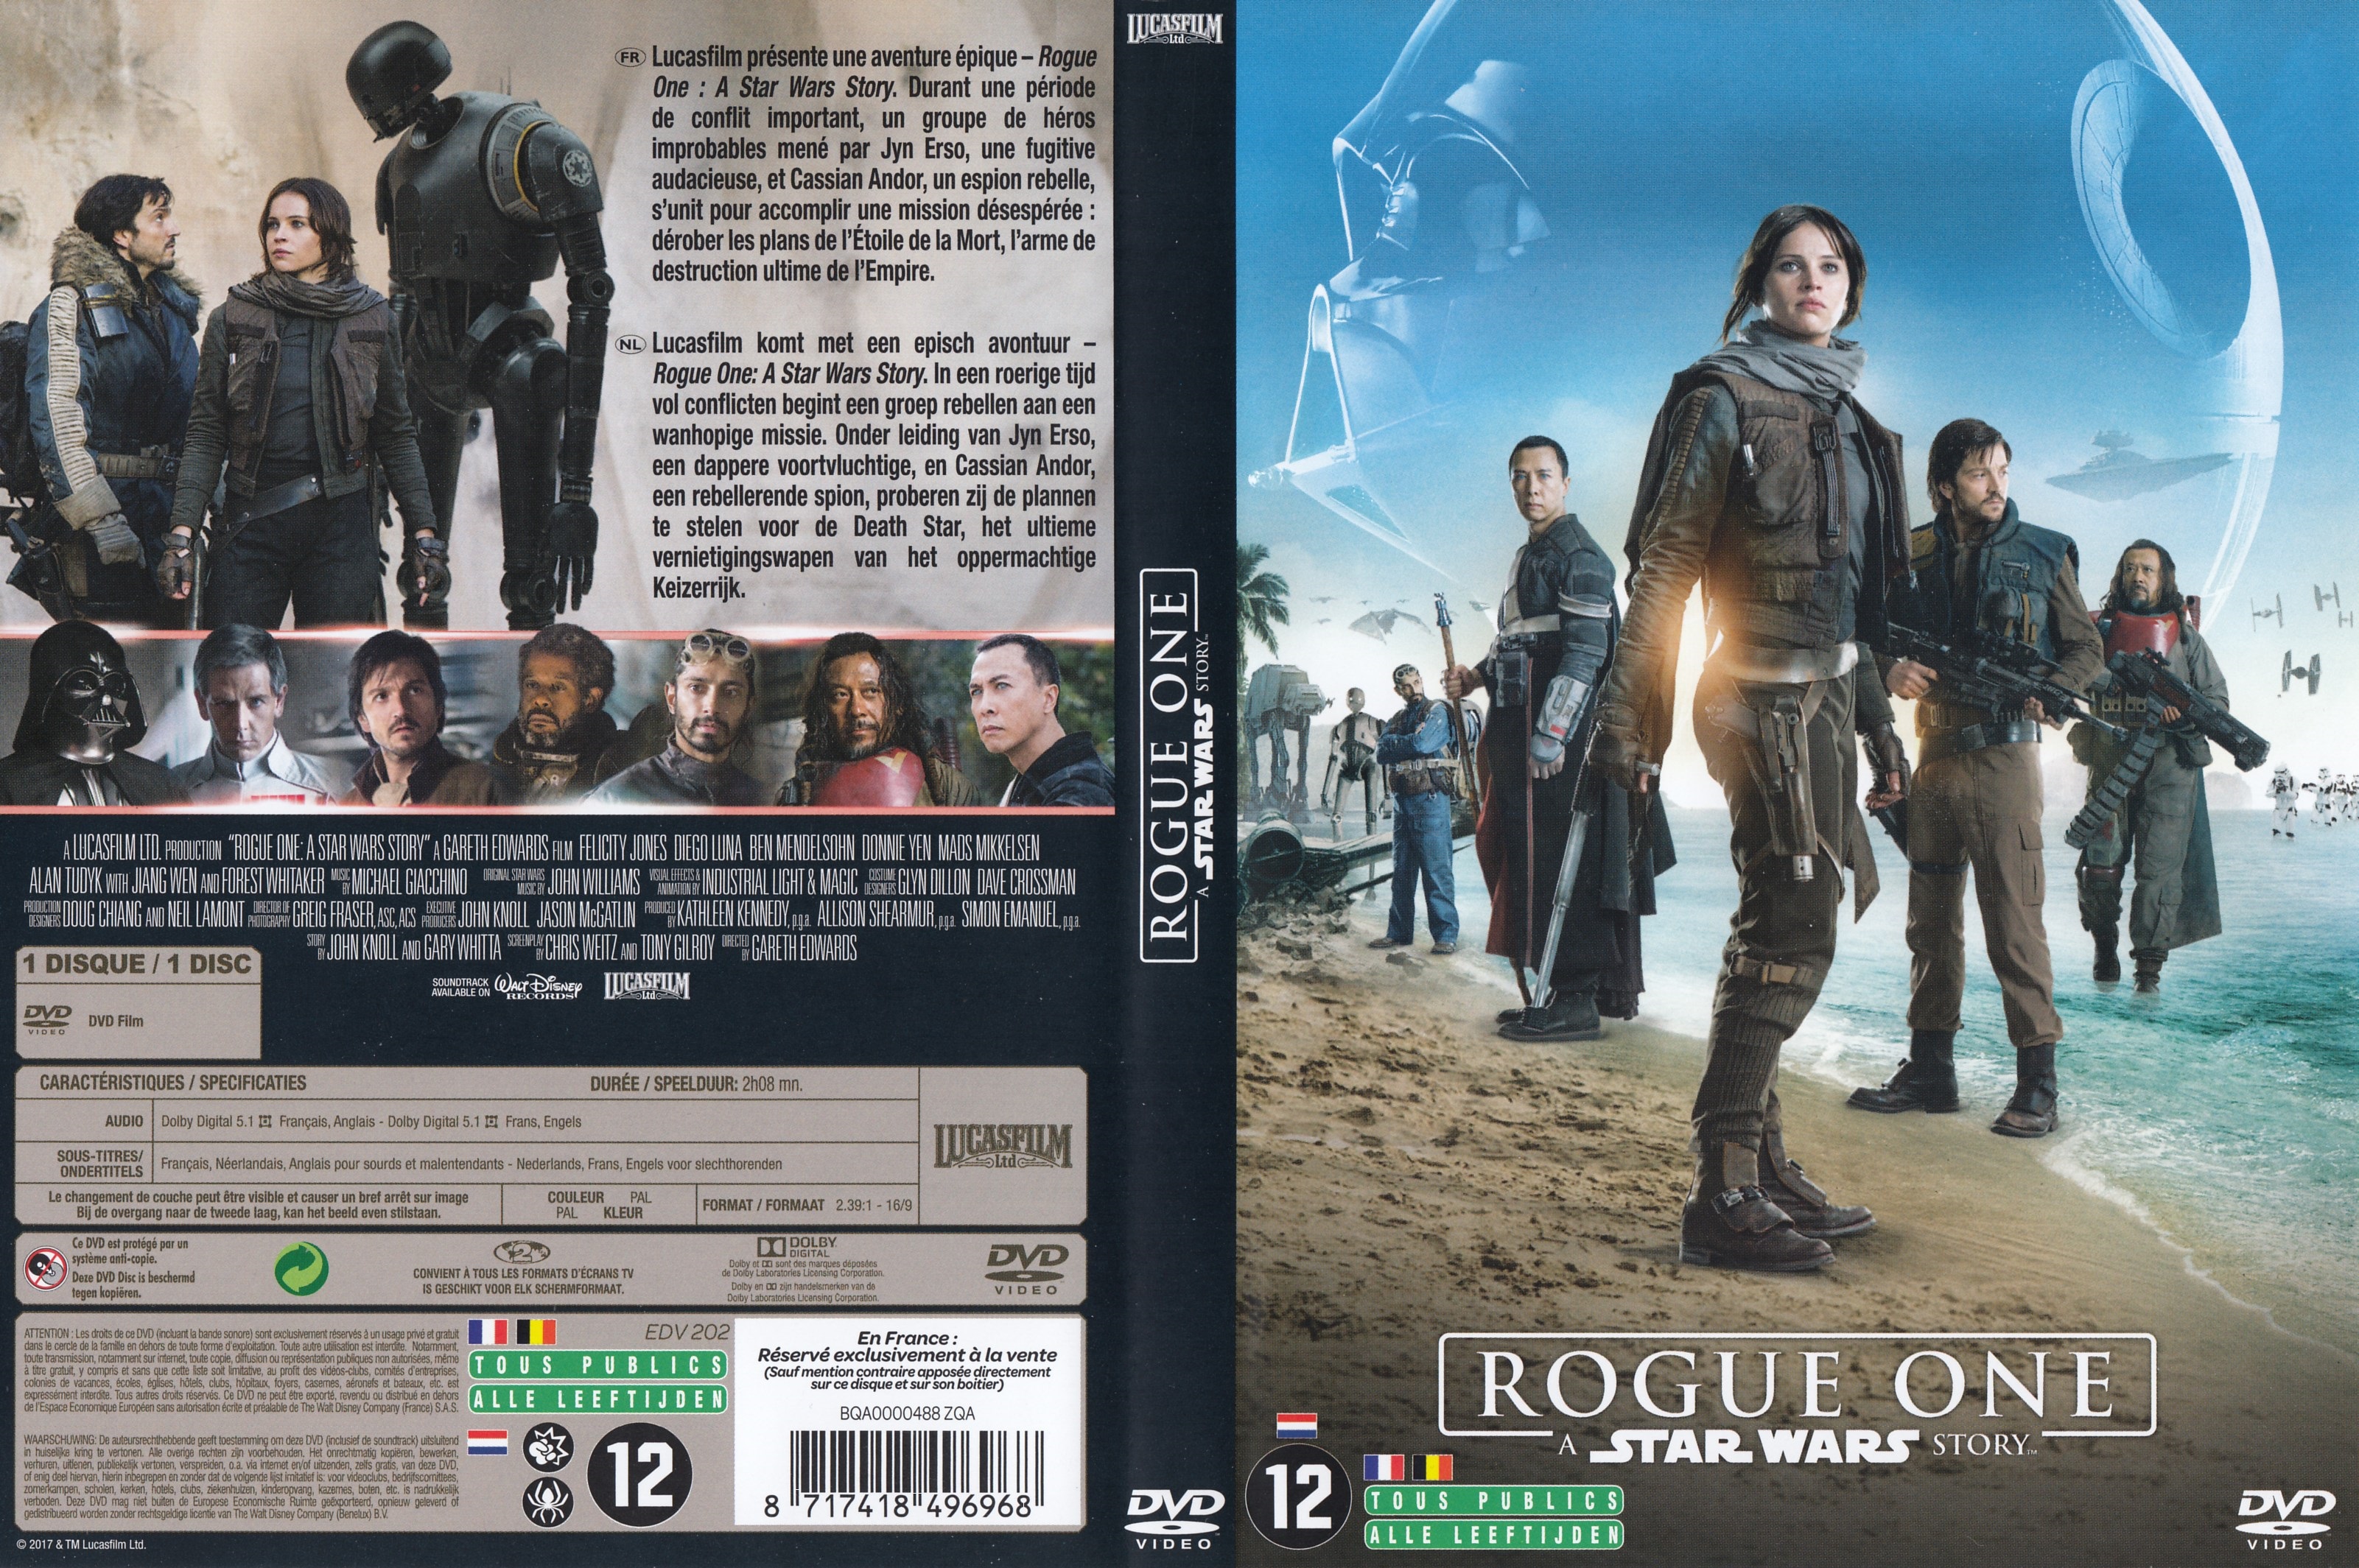 Jaquette DVD Rogue One: A Star Wars Story